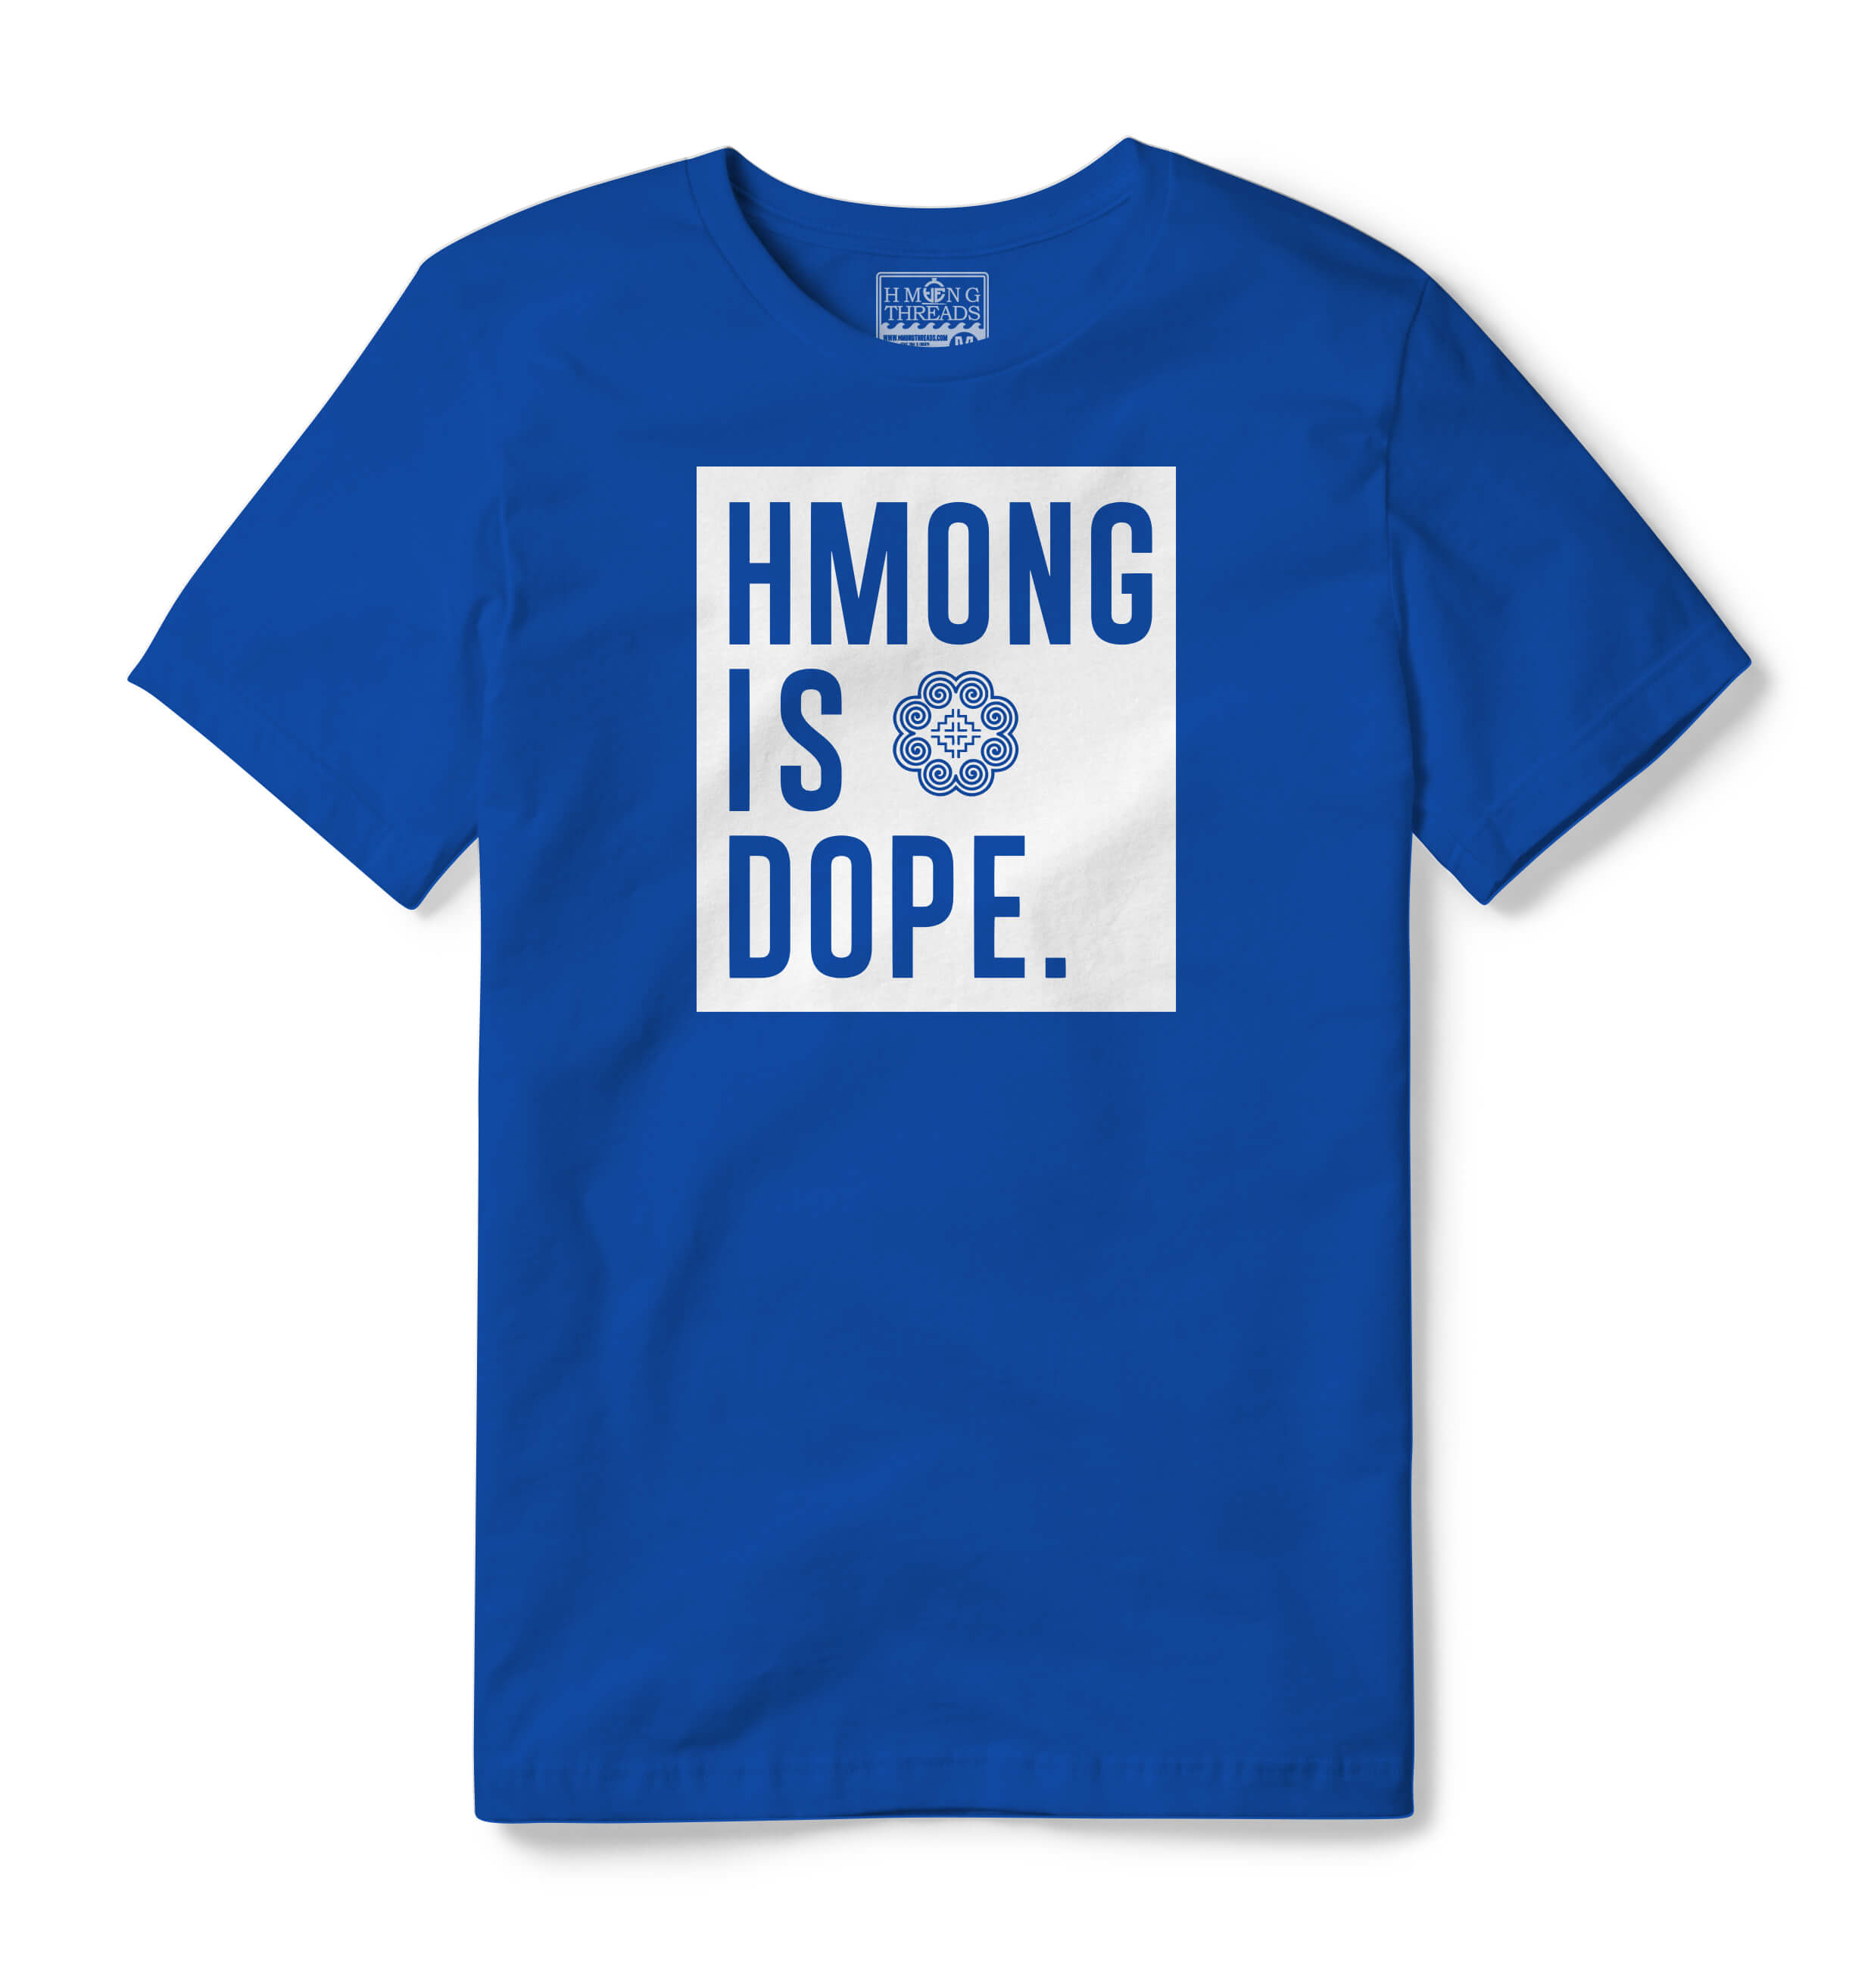 HMONG IS DOPE ROYAL BLUE TEE